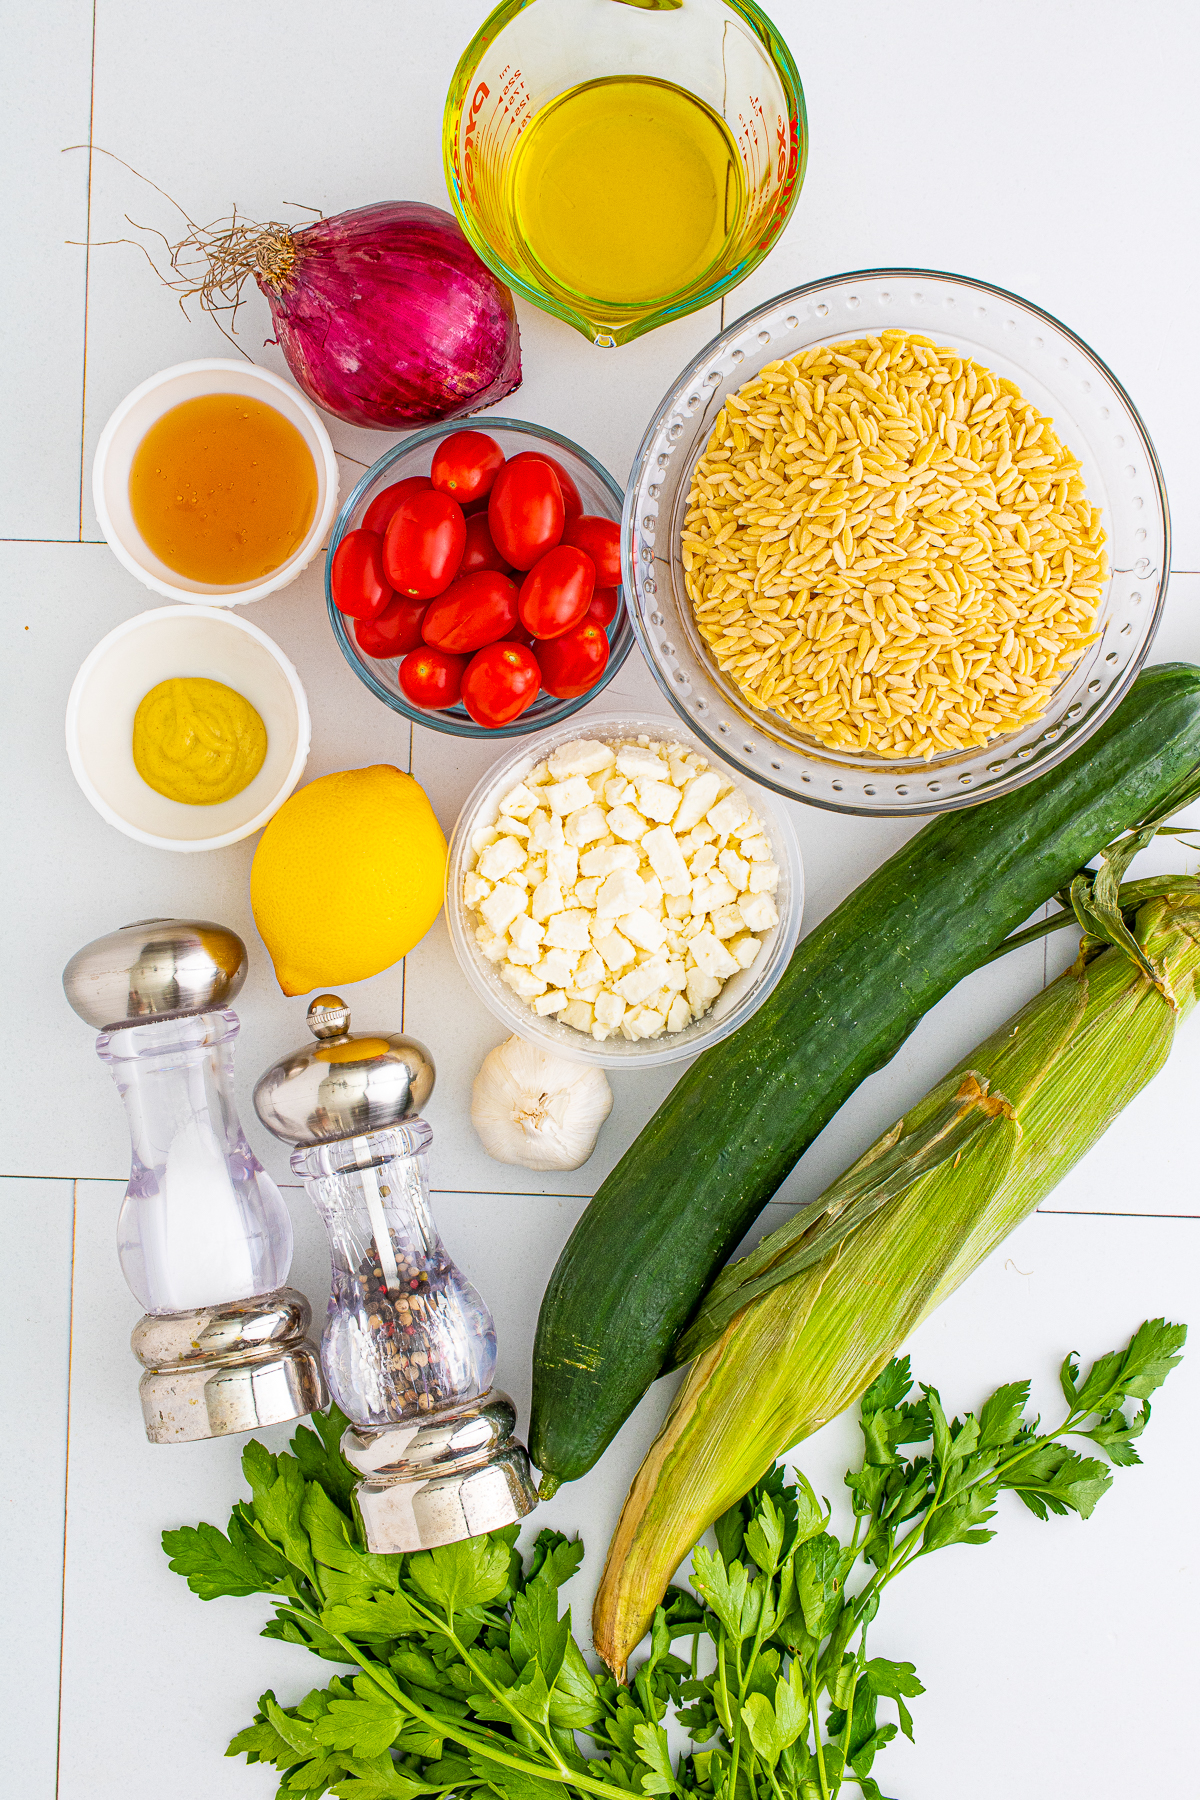 Ingredients needed to make Orzo Pasta Salad